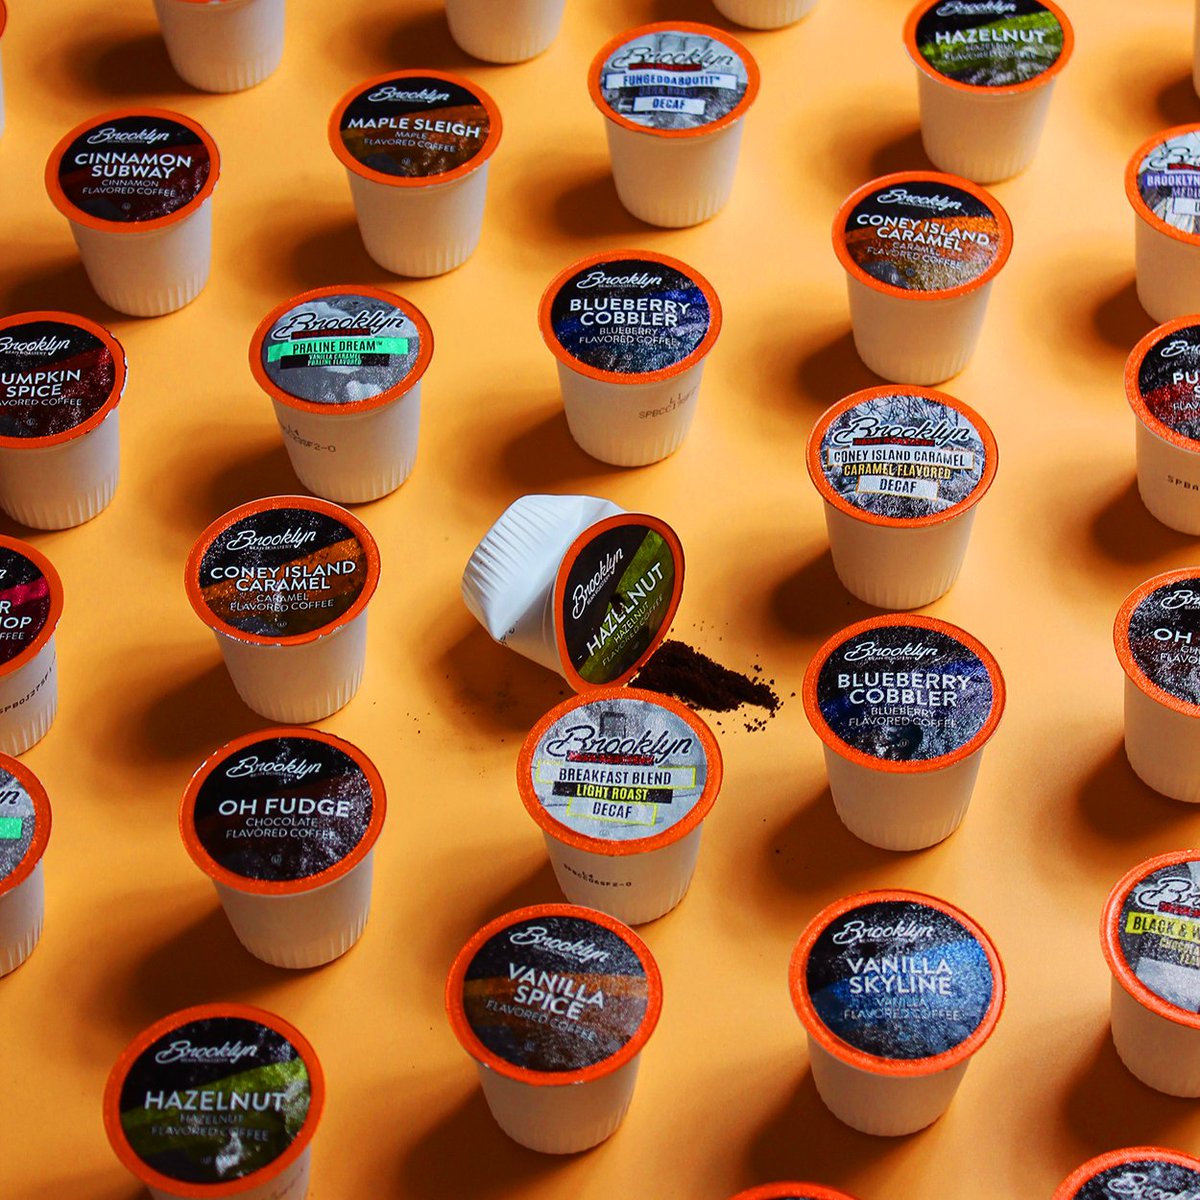 Explore the delightful diversity of BBR K-Cups – there’s a flavor to suit every palate! ✨☕️

#CoffeeBreak #NYCCoffee #NewYork #CoffeeLover #CoffeeGram #Cafe #IcedCoffee#VarietyPack